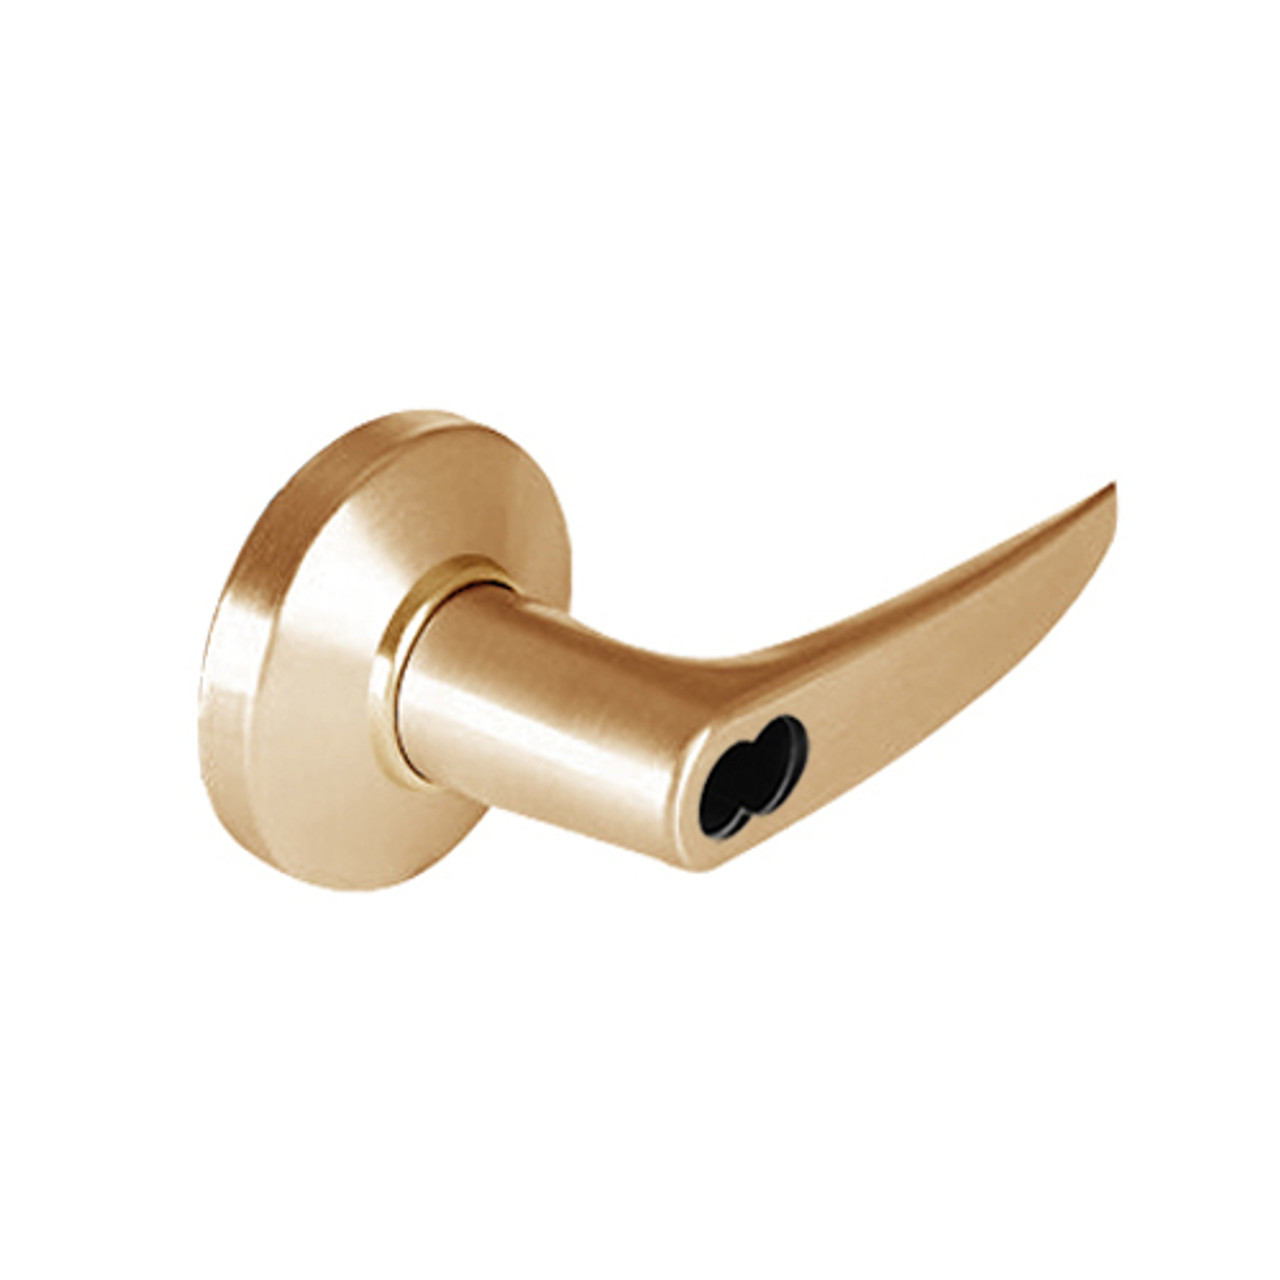 9K37HJ16CSTK612 Best 9K Series Hotel Cylindrical Lever Locks with Curved without Return Lever Design Accept 7 Pin Best Core in Satin Bronze